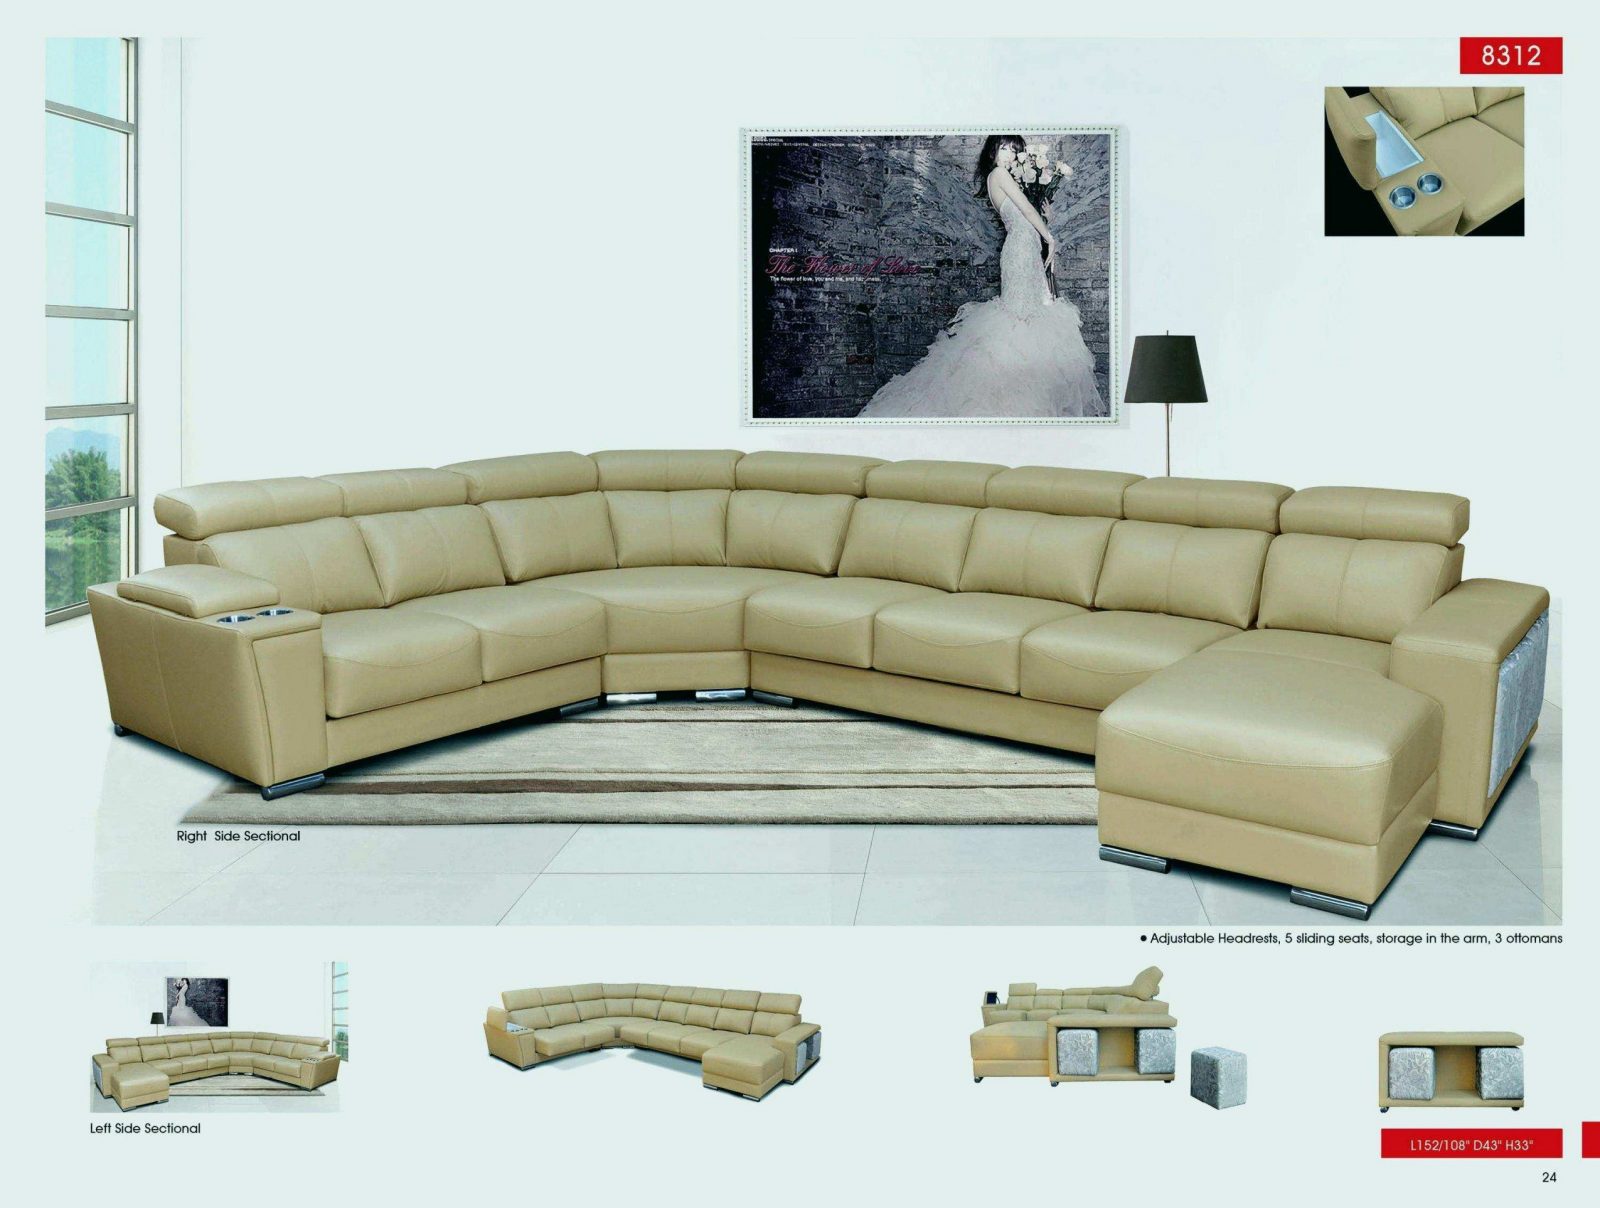 23 Seats And Sofas Angebote – Fauteuil &amp; Sofa von Seats And Sofas Angebote Bild